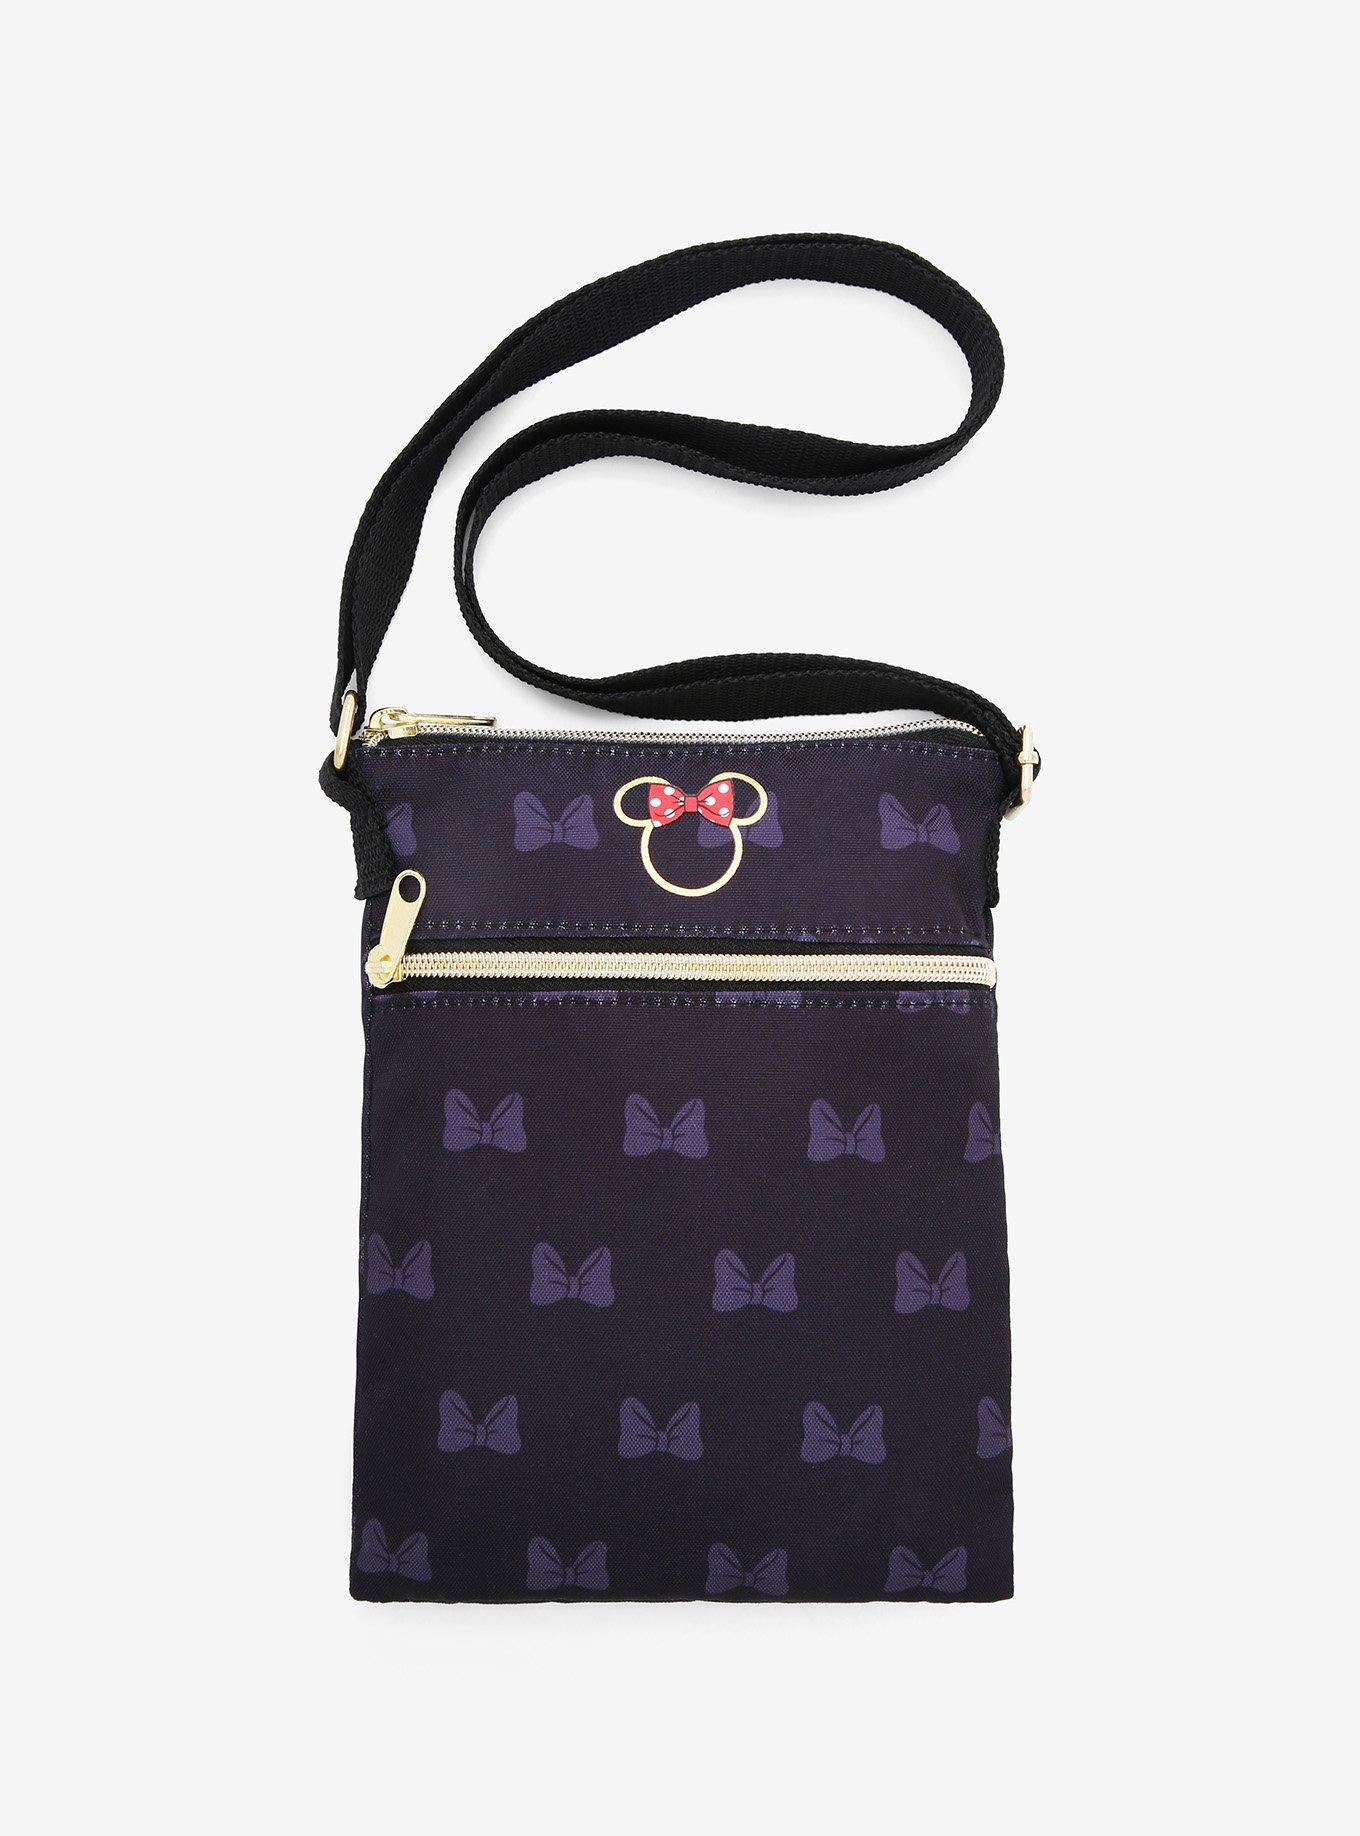 NWT EXCLUSIVE Loungefly Disney Fall Minnie Mouse Crossbody Bag with Wallet!